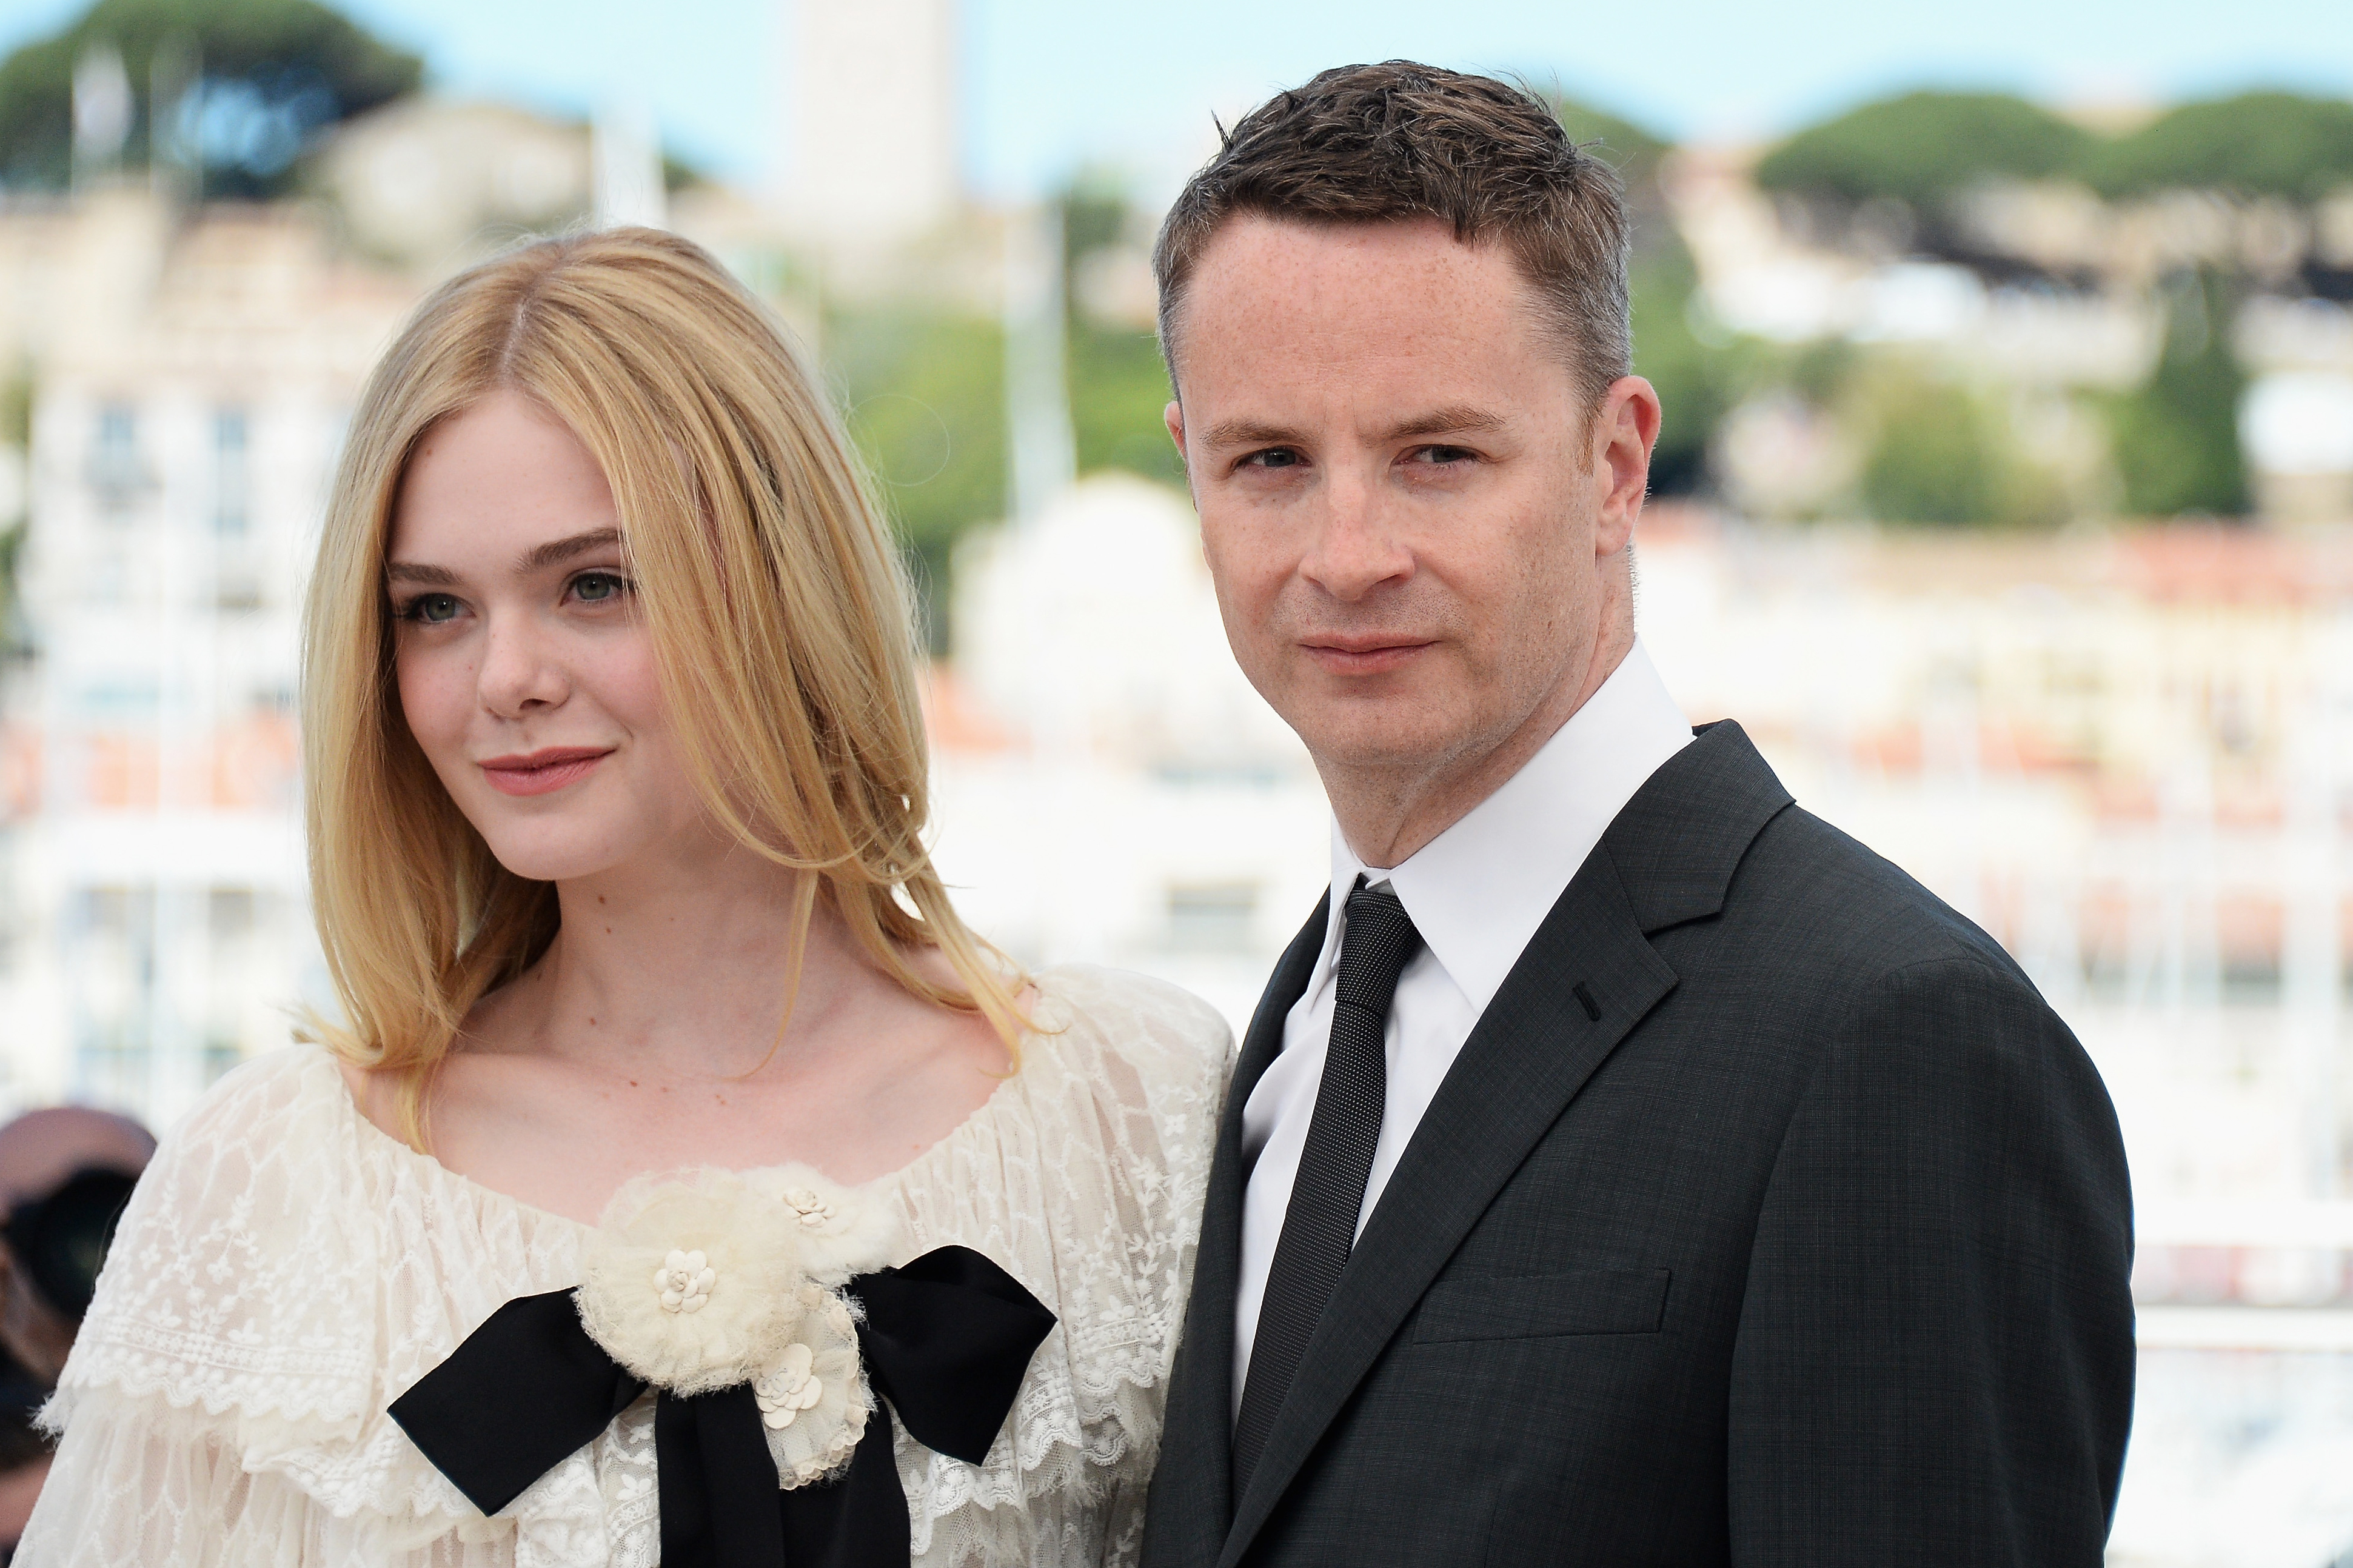 Elle Fanning and director Nicolas Winding Refn during the 69th annual Cannes Film Festival at the Palais des Festivals on May 20, 2016 in Cannes, France. (Dominique Charriau—Getty Images)